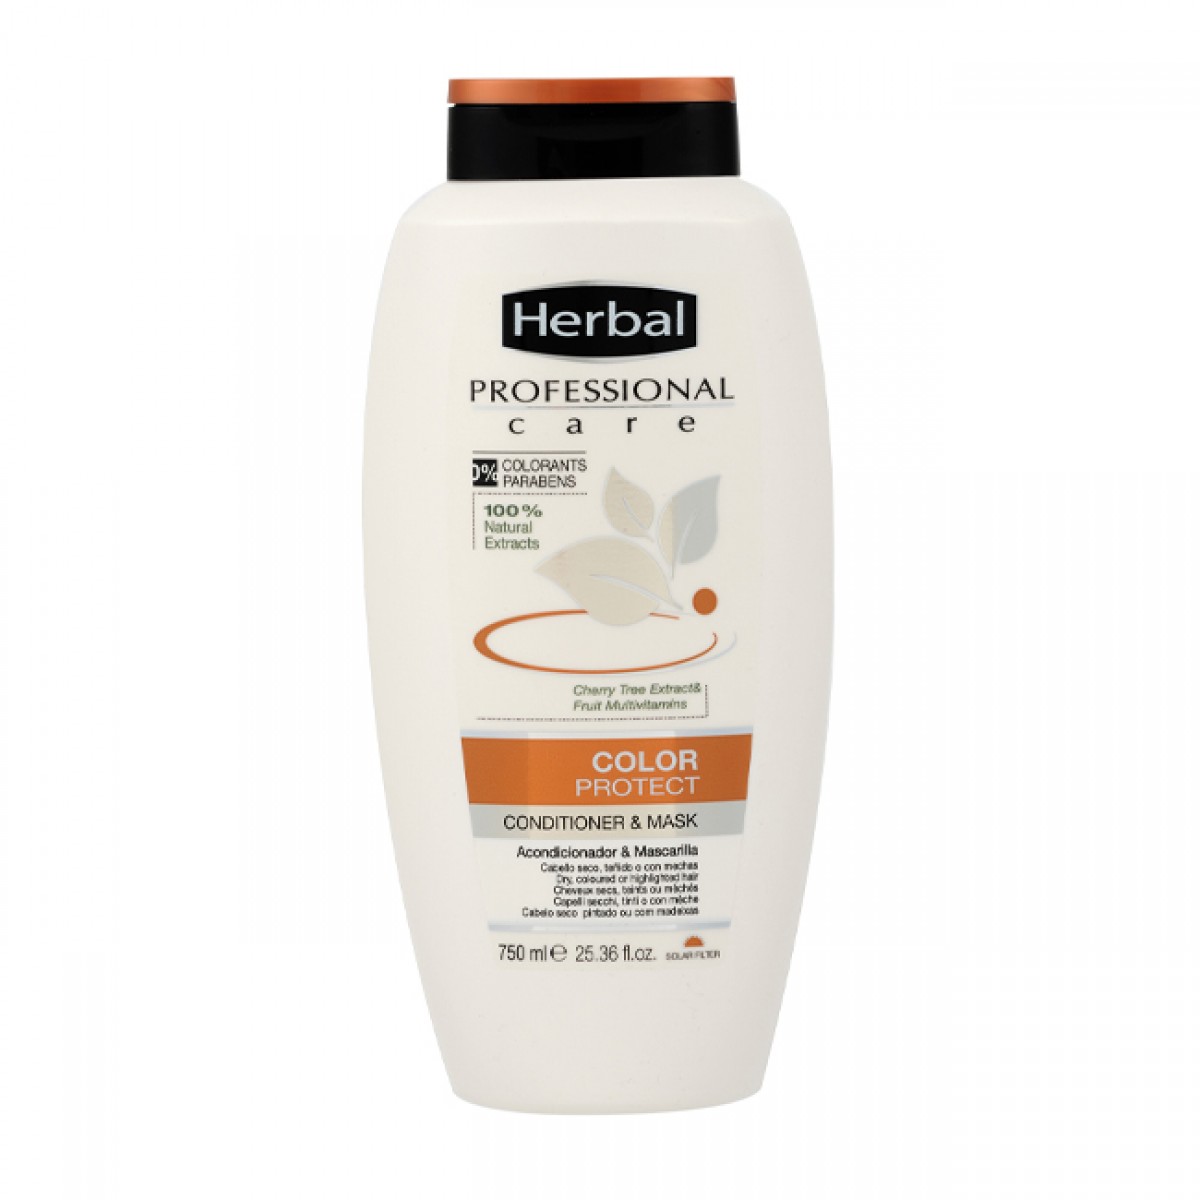 HERBAL PROFESSIONAL CARE CONDITIONER & MASK COLOR PROTECT 750 ml